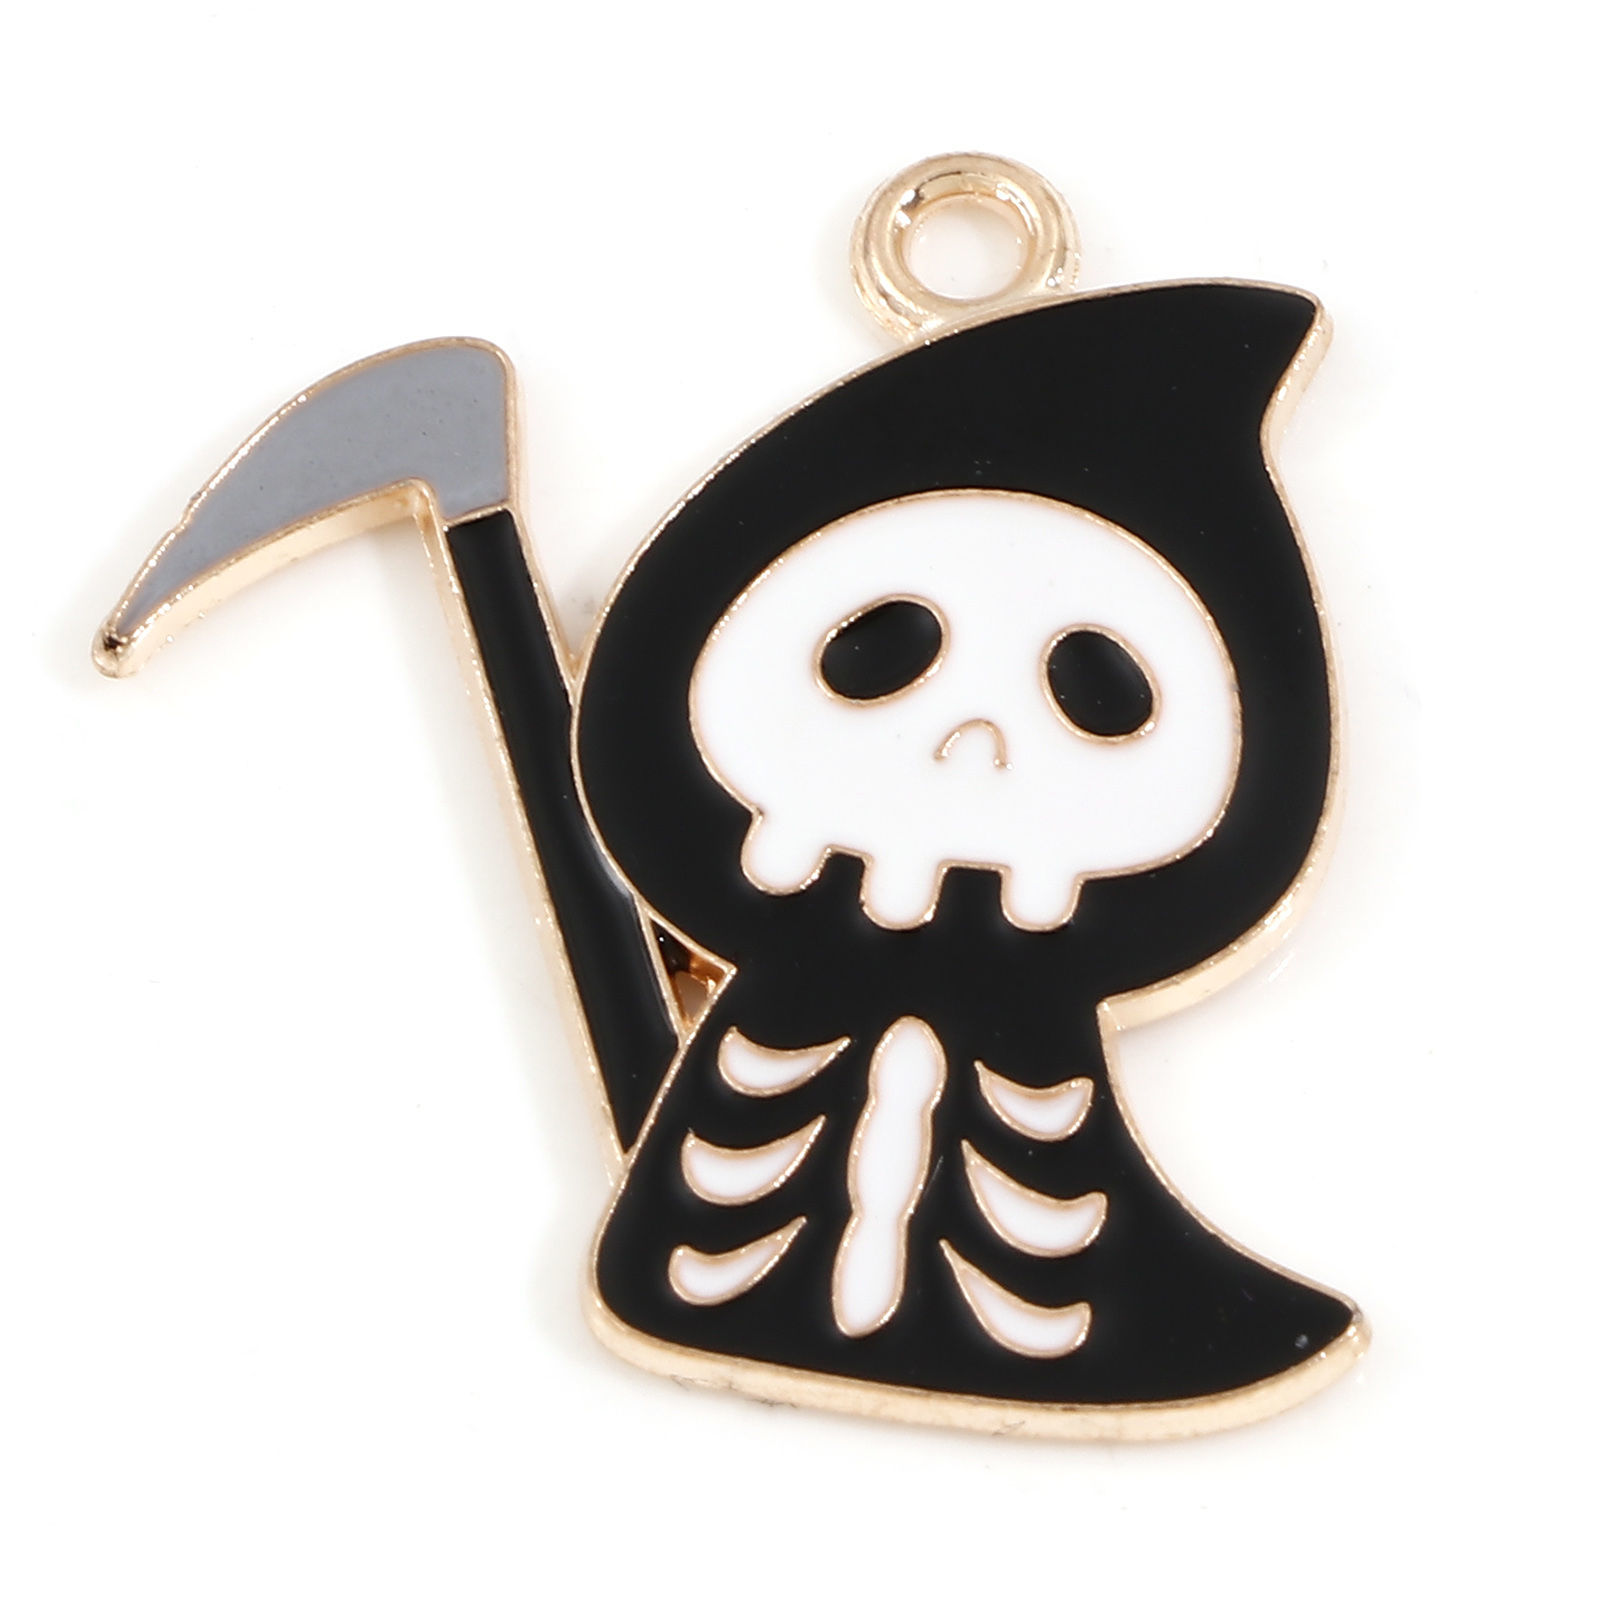 Picture of Zinc Based Alloy Halloween Charms Gold Plated Black Skeleton Skull Enamel 25mm x 25mm, 10 PCs